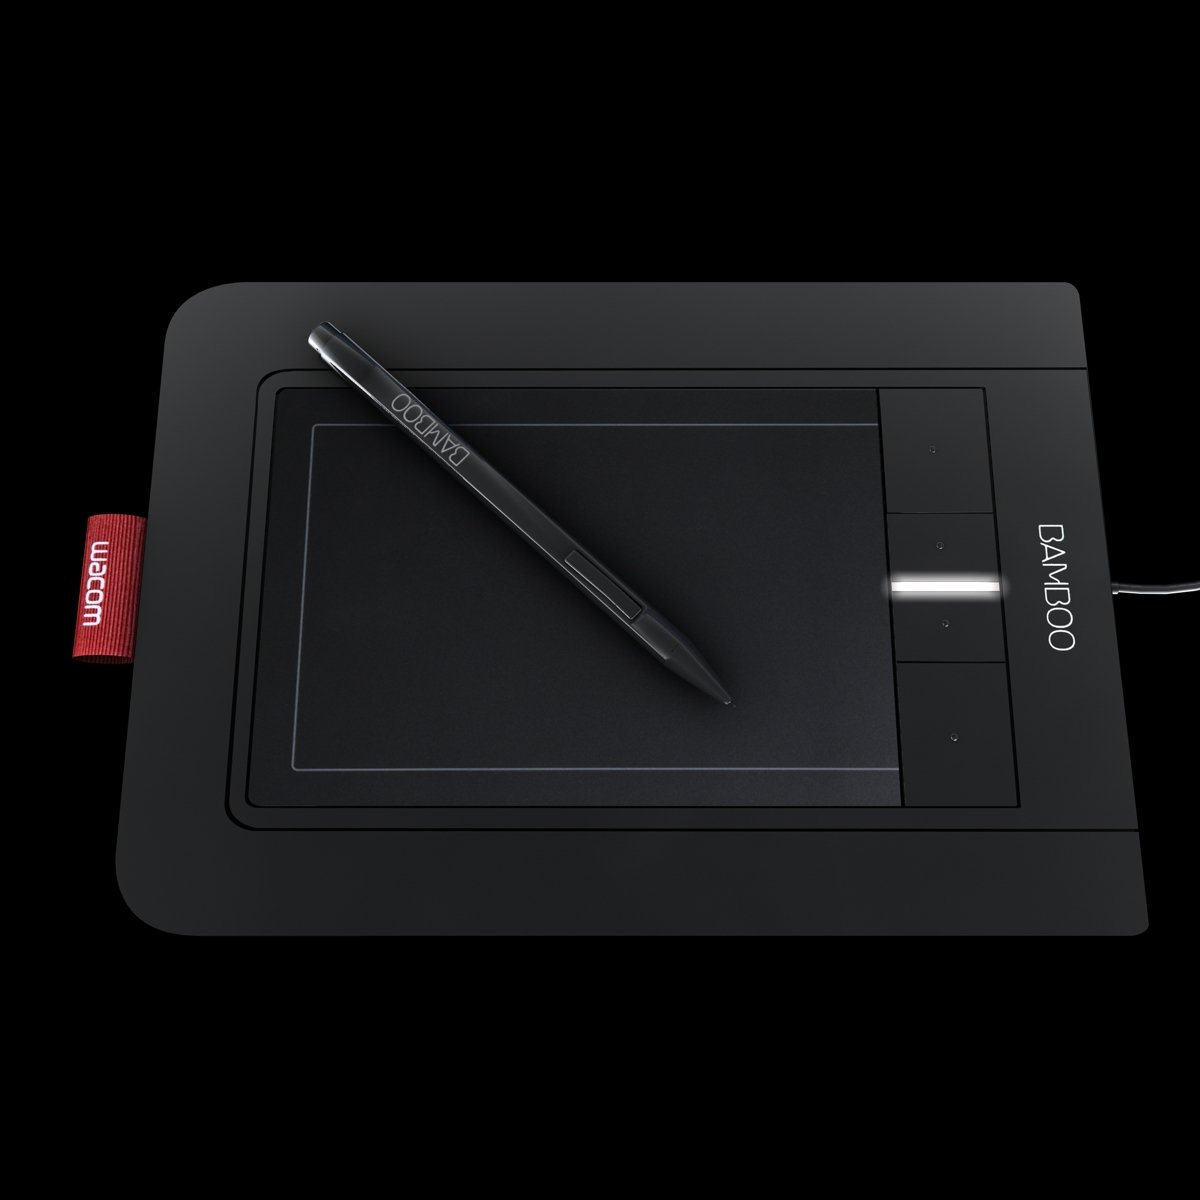 Wacom Bamboo Create Pen and Tablet - Silver/black Cth670 Drawing Pad Works  for sale online | eBay